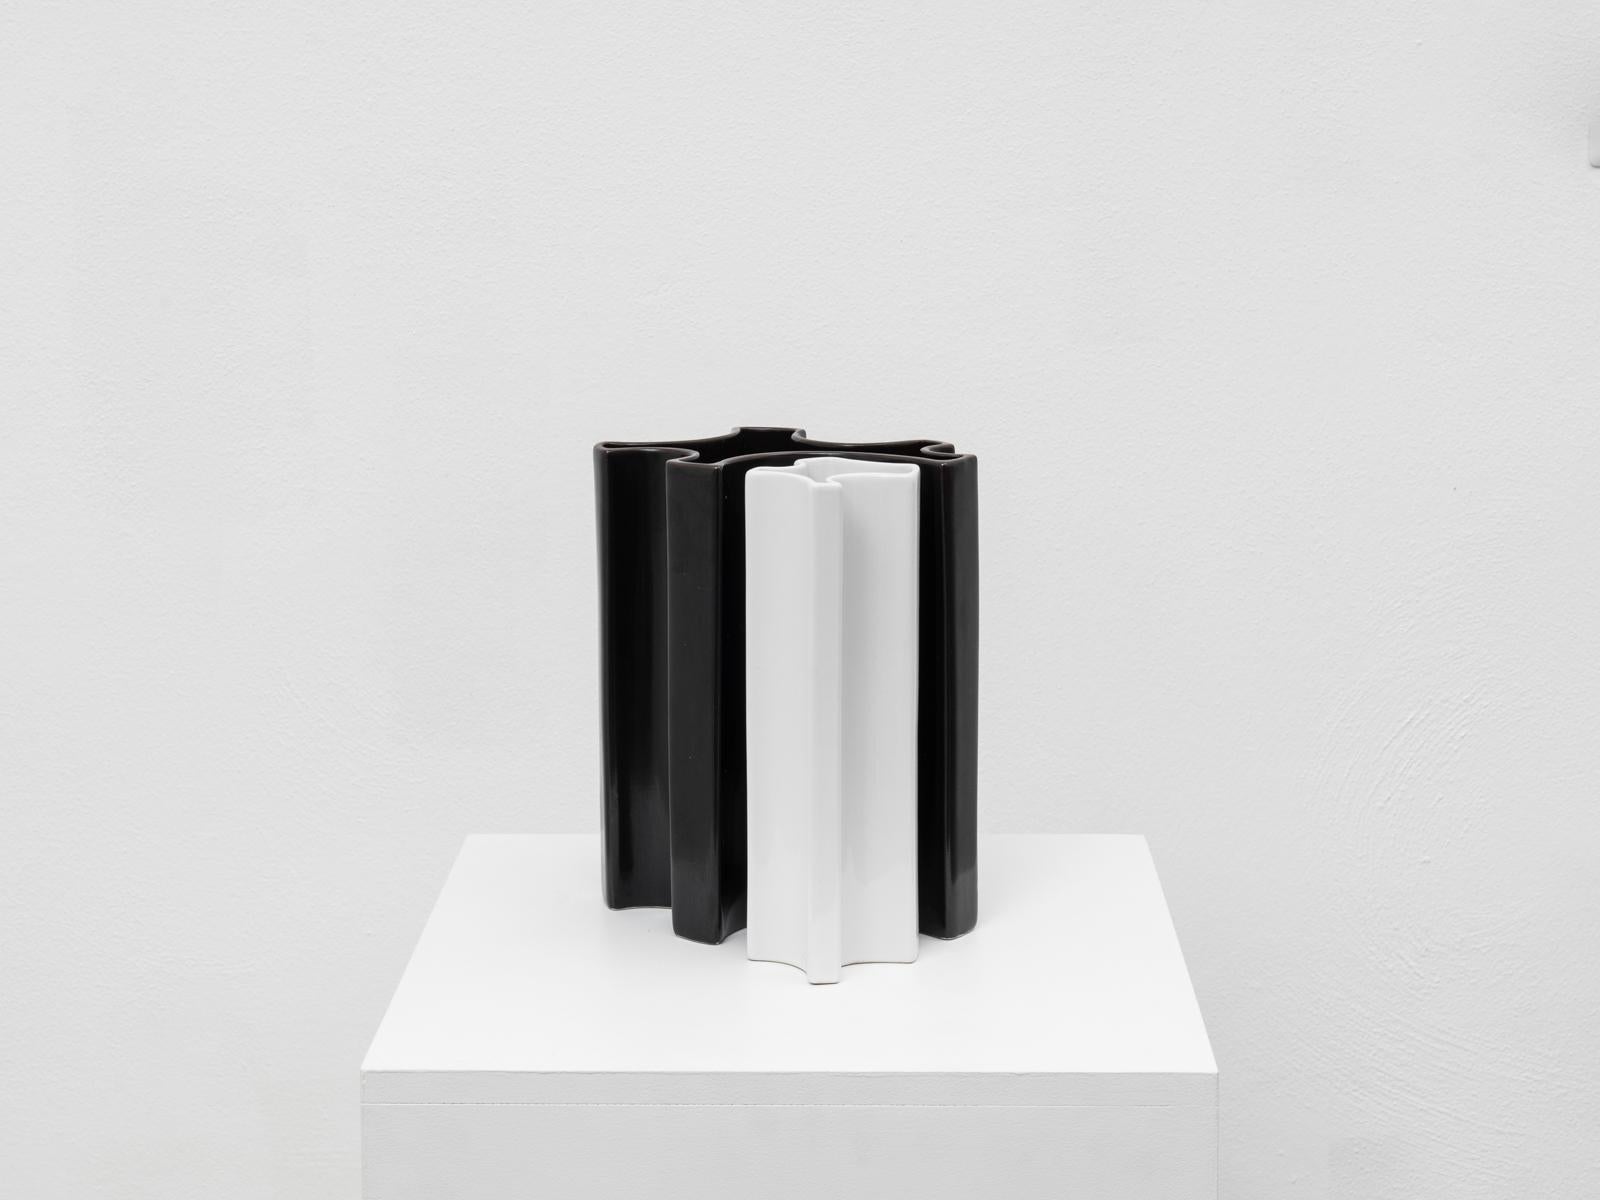 This iconic midcentury ceramic vases are part of the series of vessels designed by Italian architect Angelo Mangiarotti for Fratelli Brambilla in the 1960s.
This vases are model M6 and M8, designed in 1968. M6 has a clear white color, while M8 is